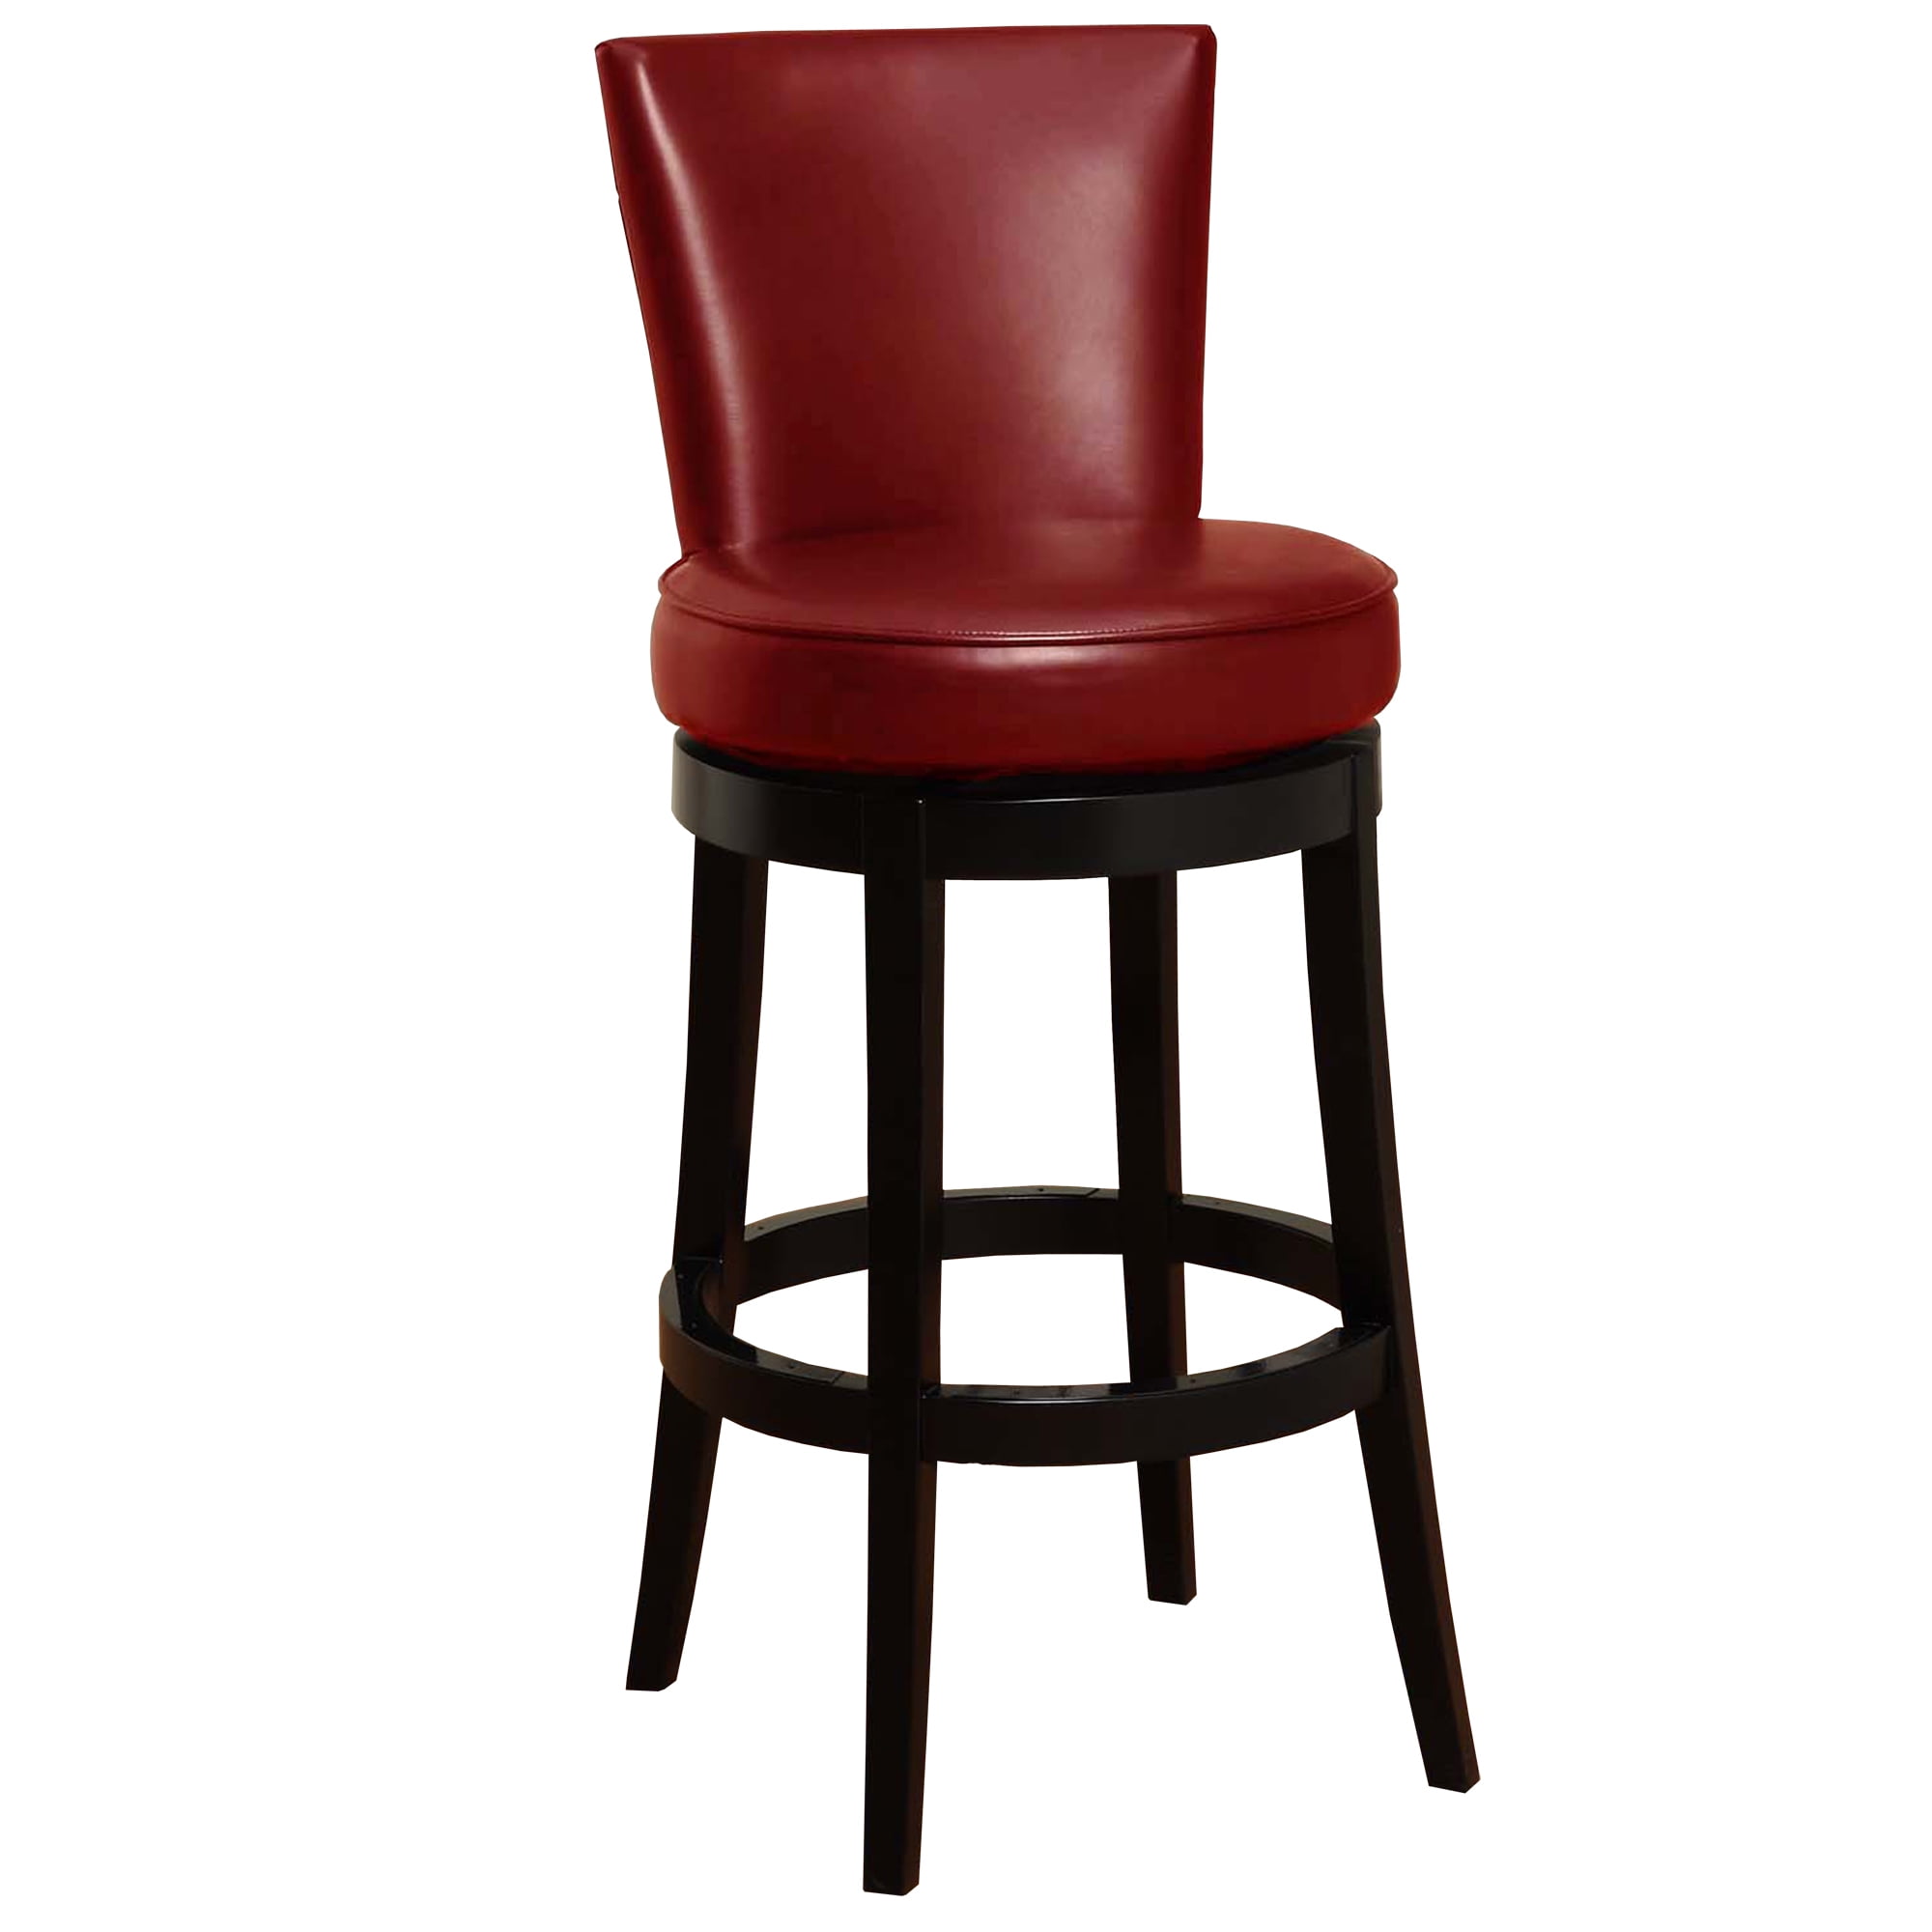 Boston Swivel Barstool Red Bicast, Bar Stools Red Leather